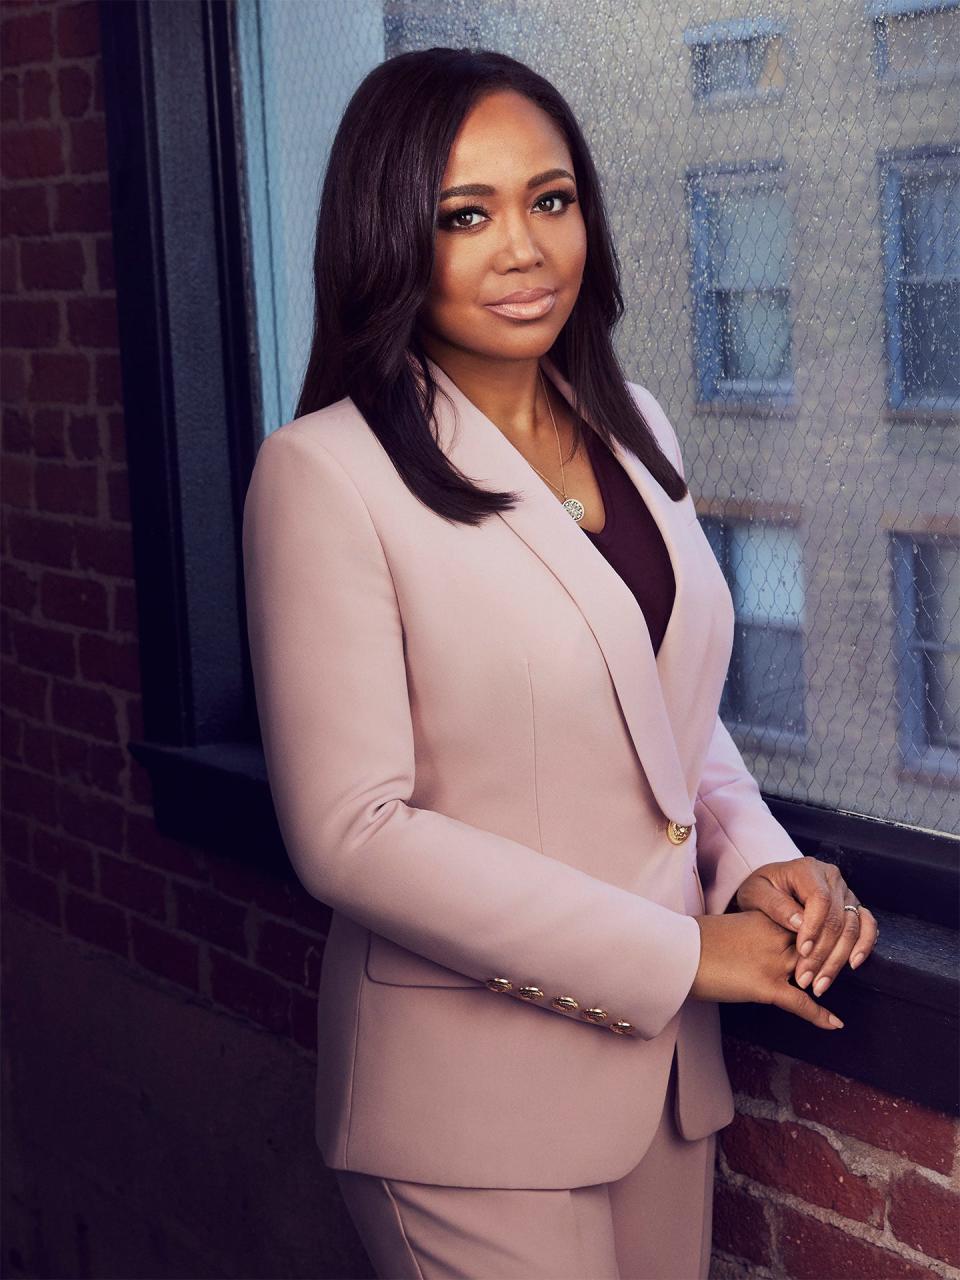 Now, Faith Jenkins hosts Oxygen's hit show "Killer Relationship with Faith Jenkins" and its second season premiers on the network Sunday, May 28, 2023.